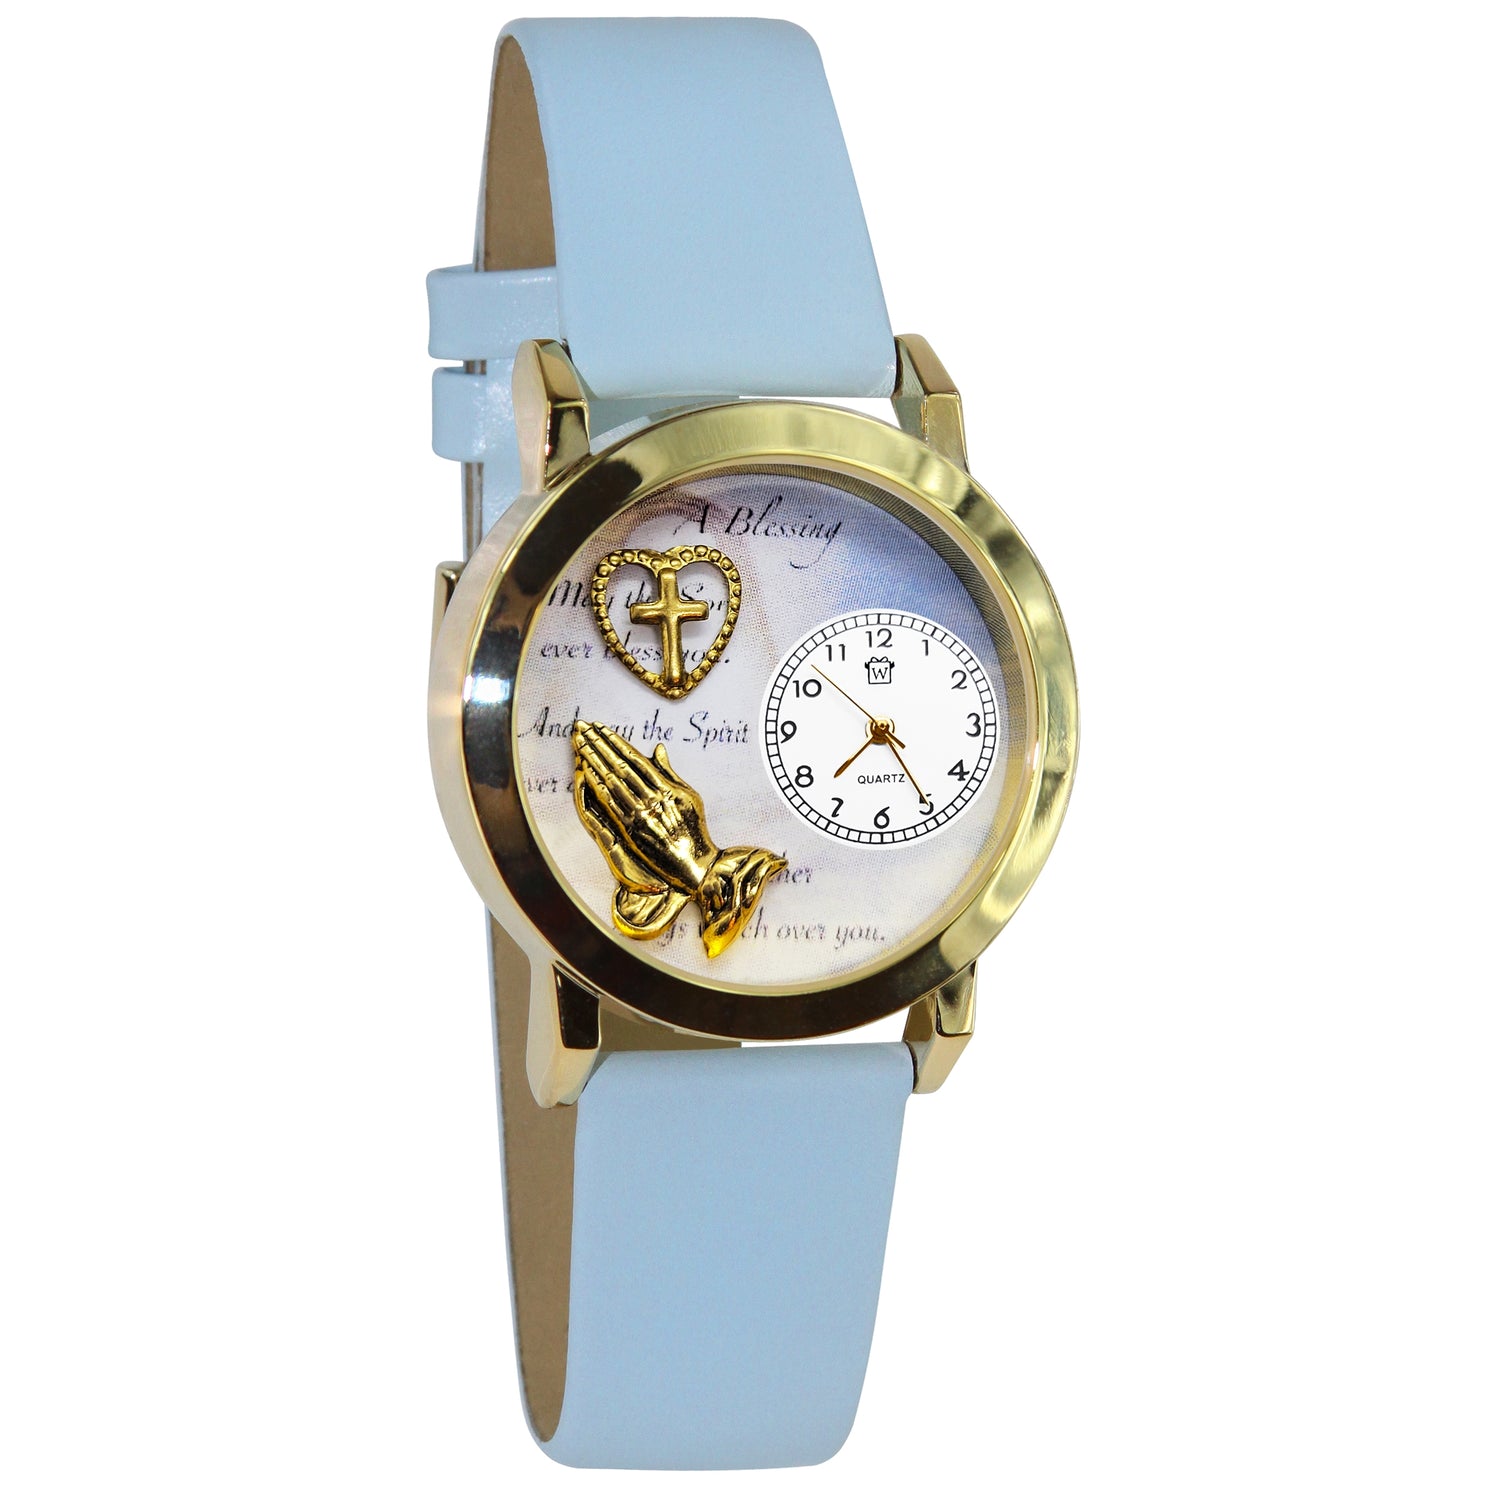 Whimsical Gifts | Blessings Heart Cross 3D Watch Small Style | Handmade in USA | Religious & Spiritual |  | Novelty Unique Fun Miniatures Gift | Gold Finish Light Blue Leather Watch Band